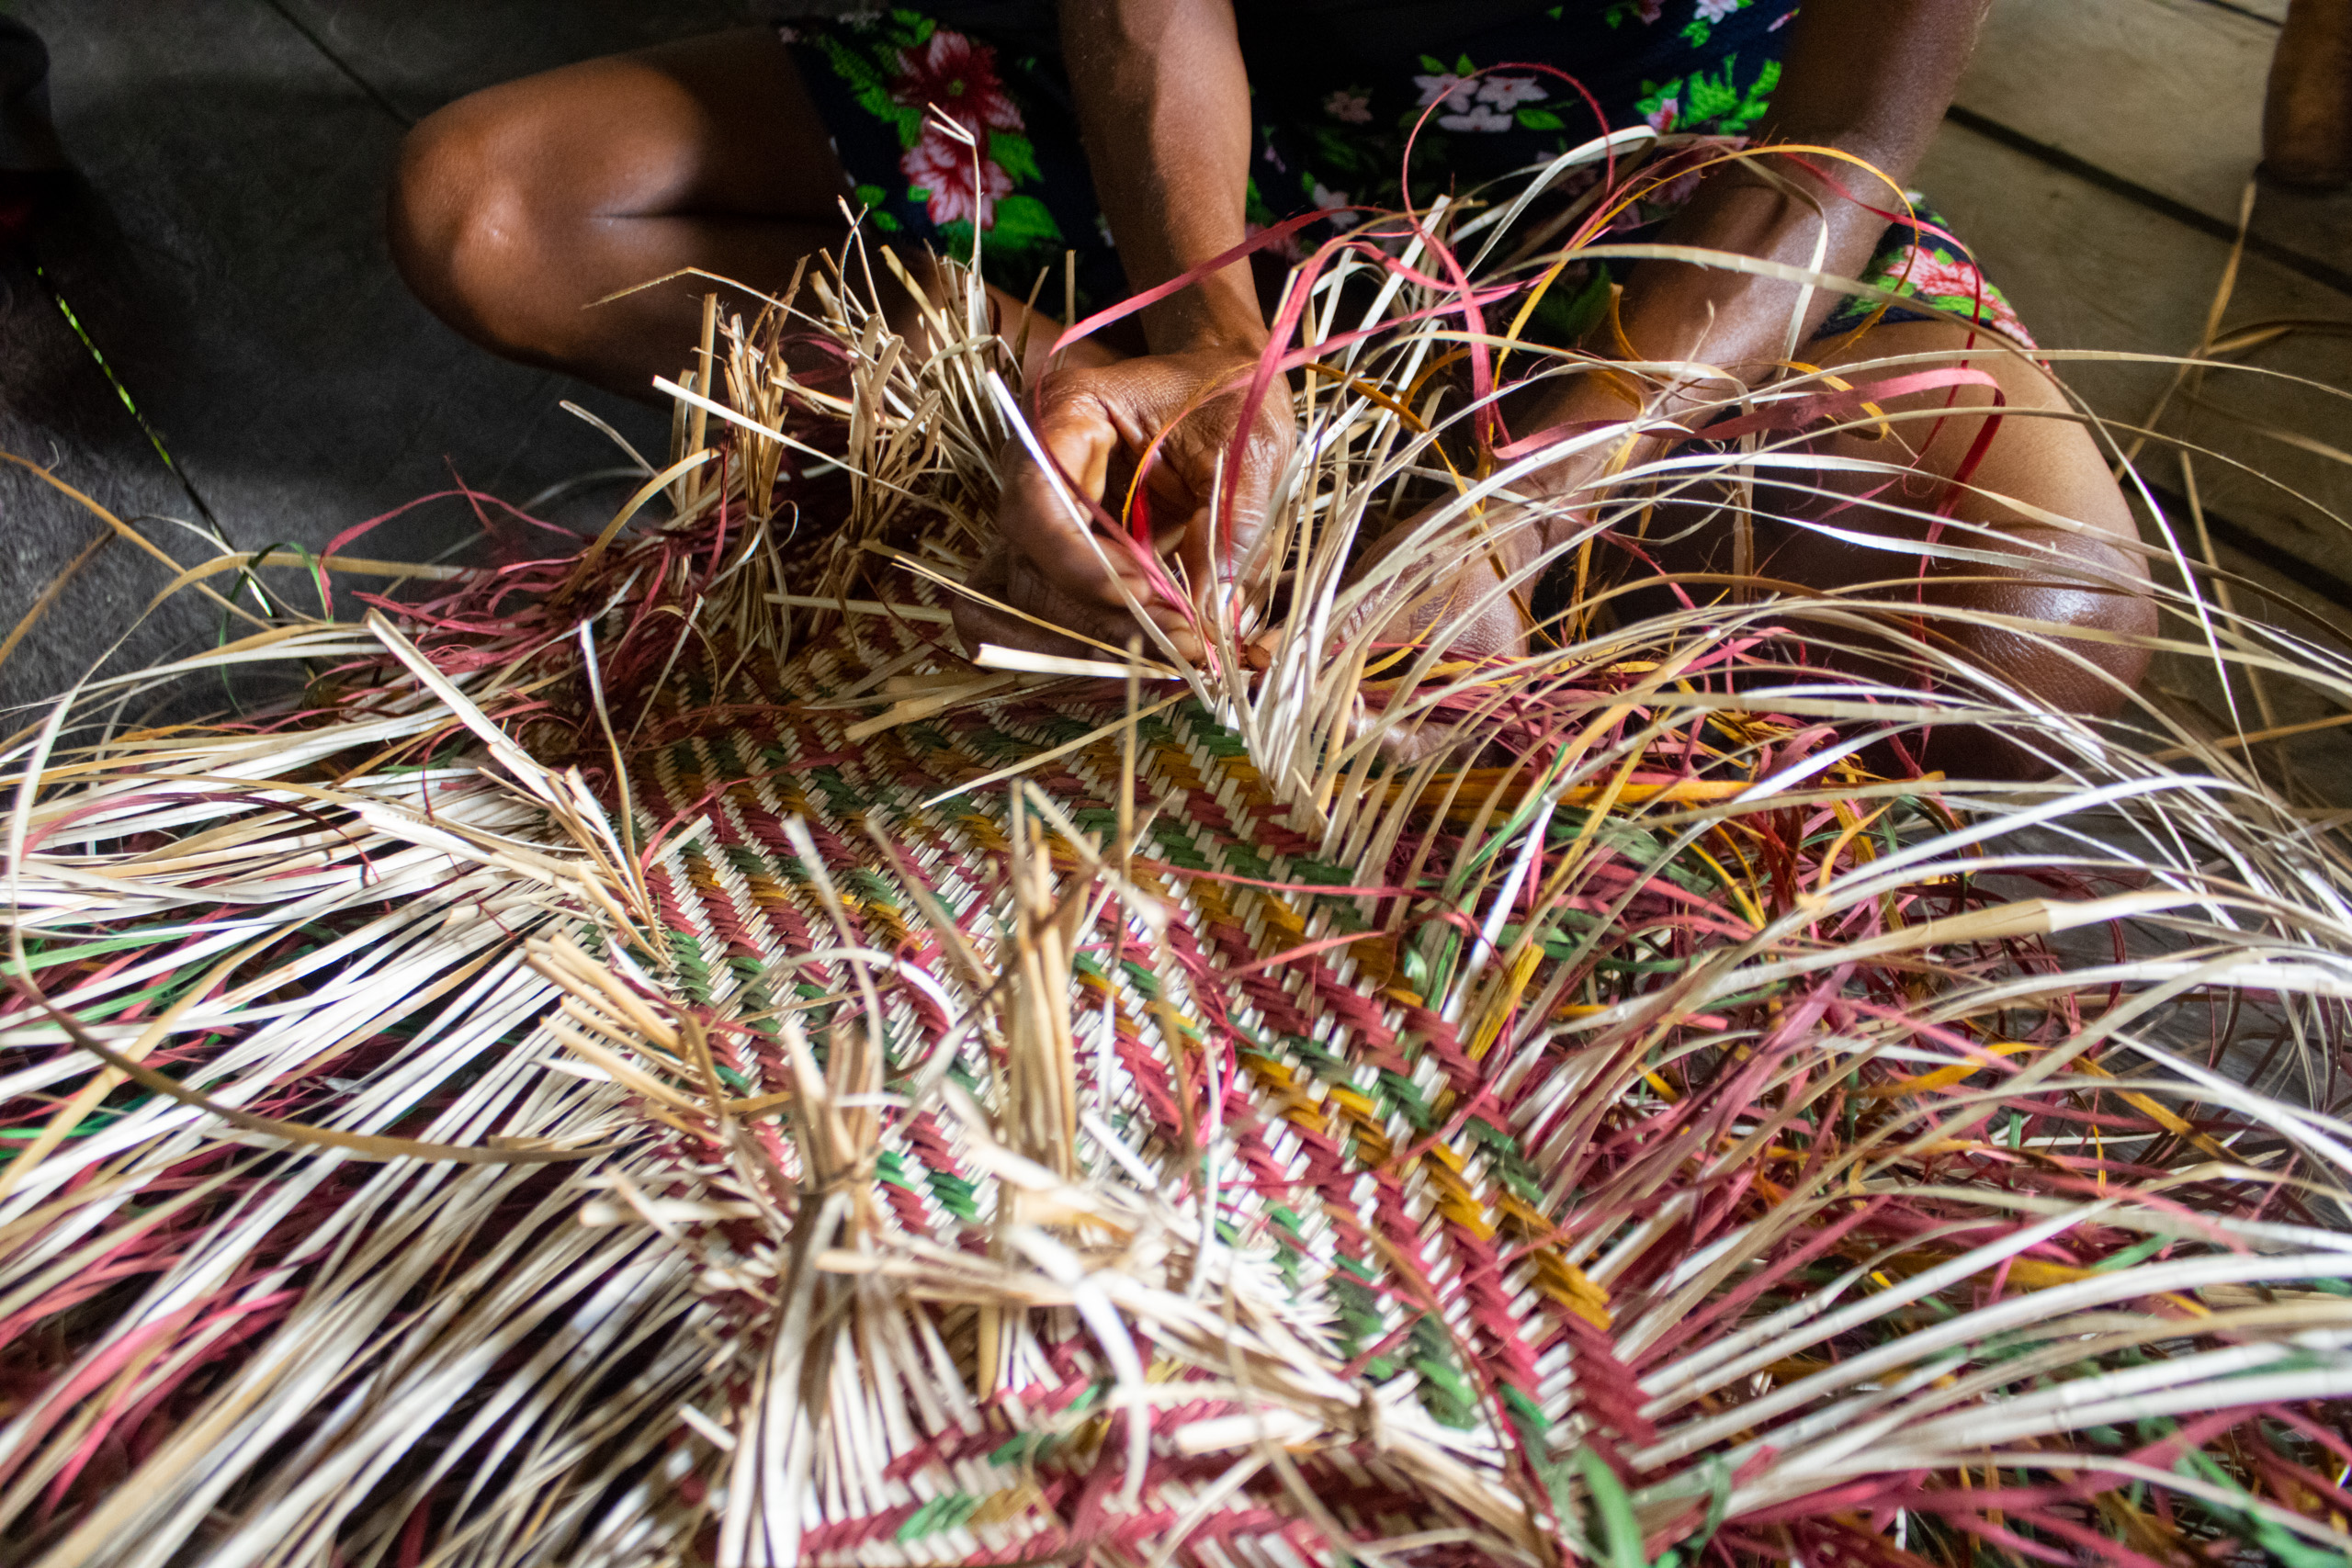 Woven items like noken bags are a source of income for women in West Papua